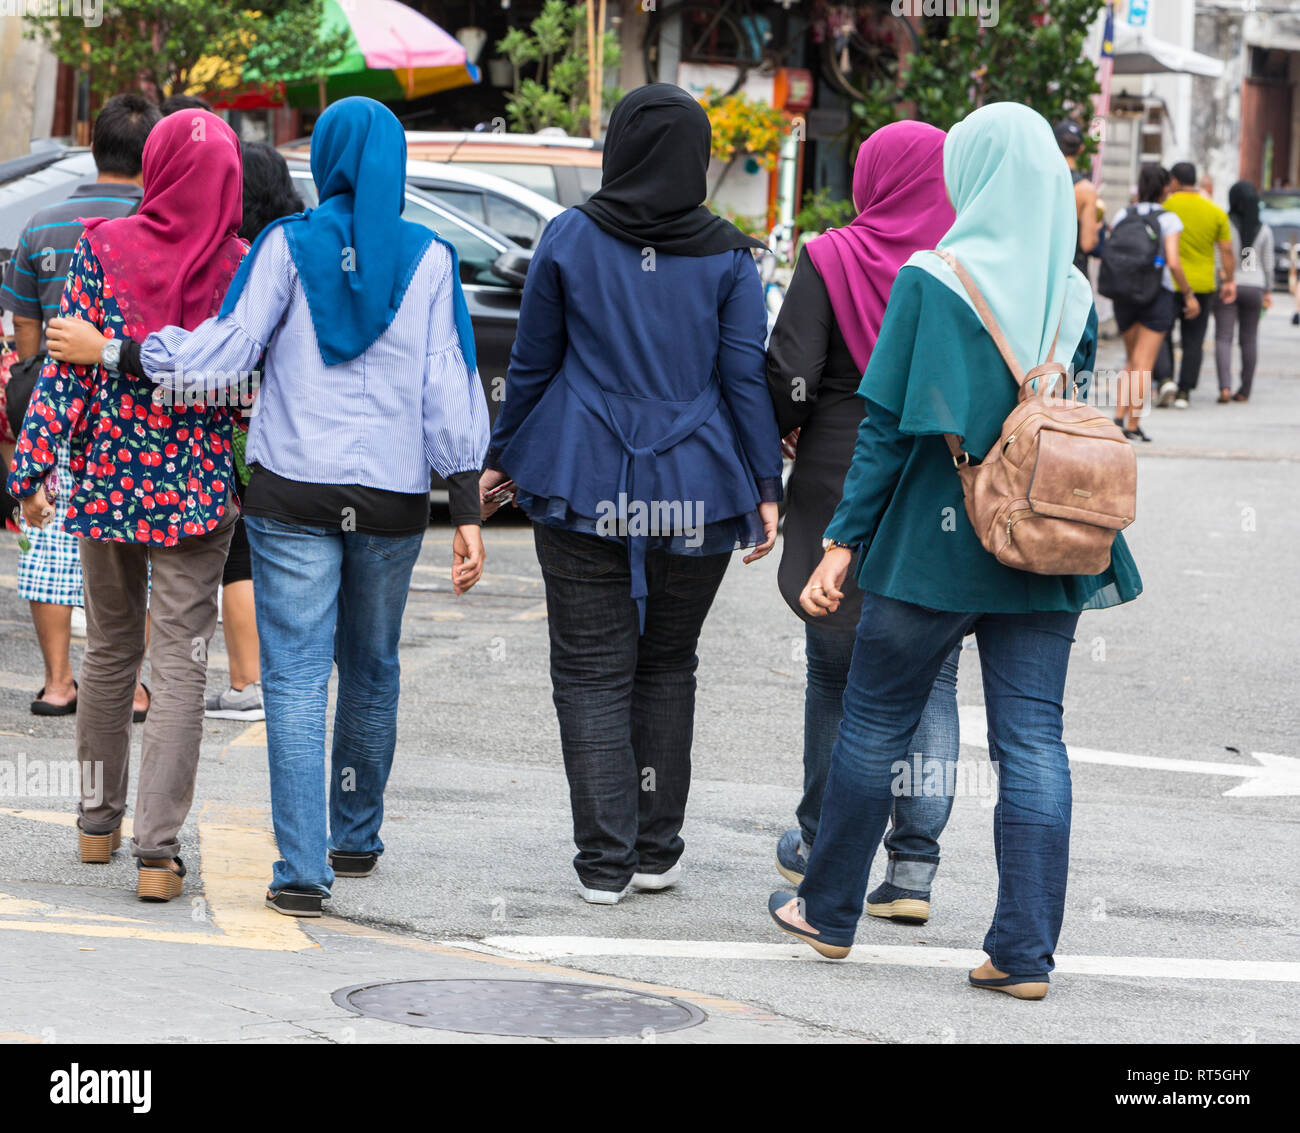 George Town, Penang, Malaysia.  Malaysian Women in Conservative Muslim Dress, with Blue Jeans. Stock Photo